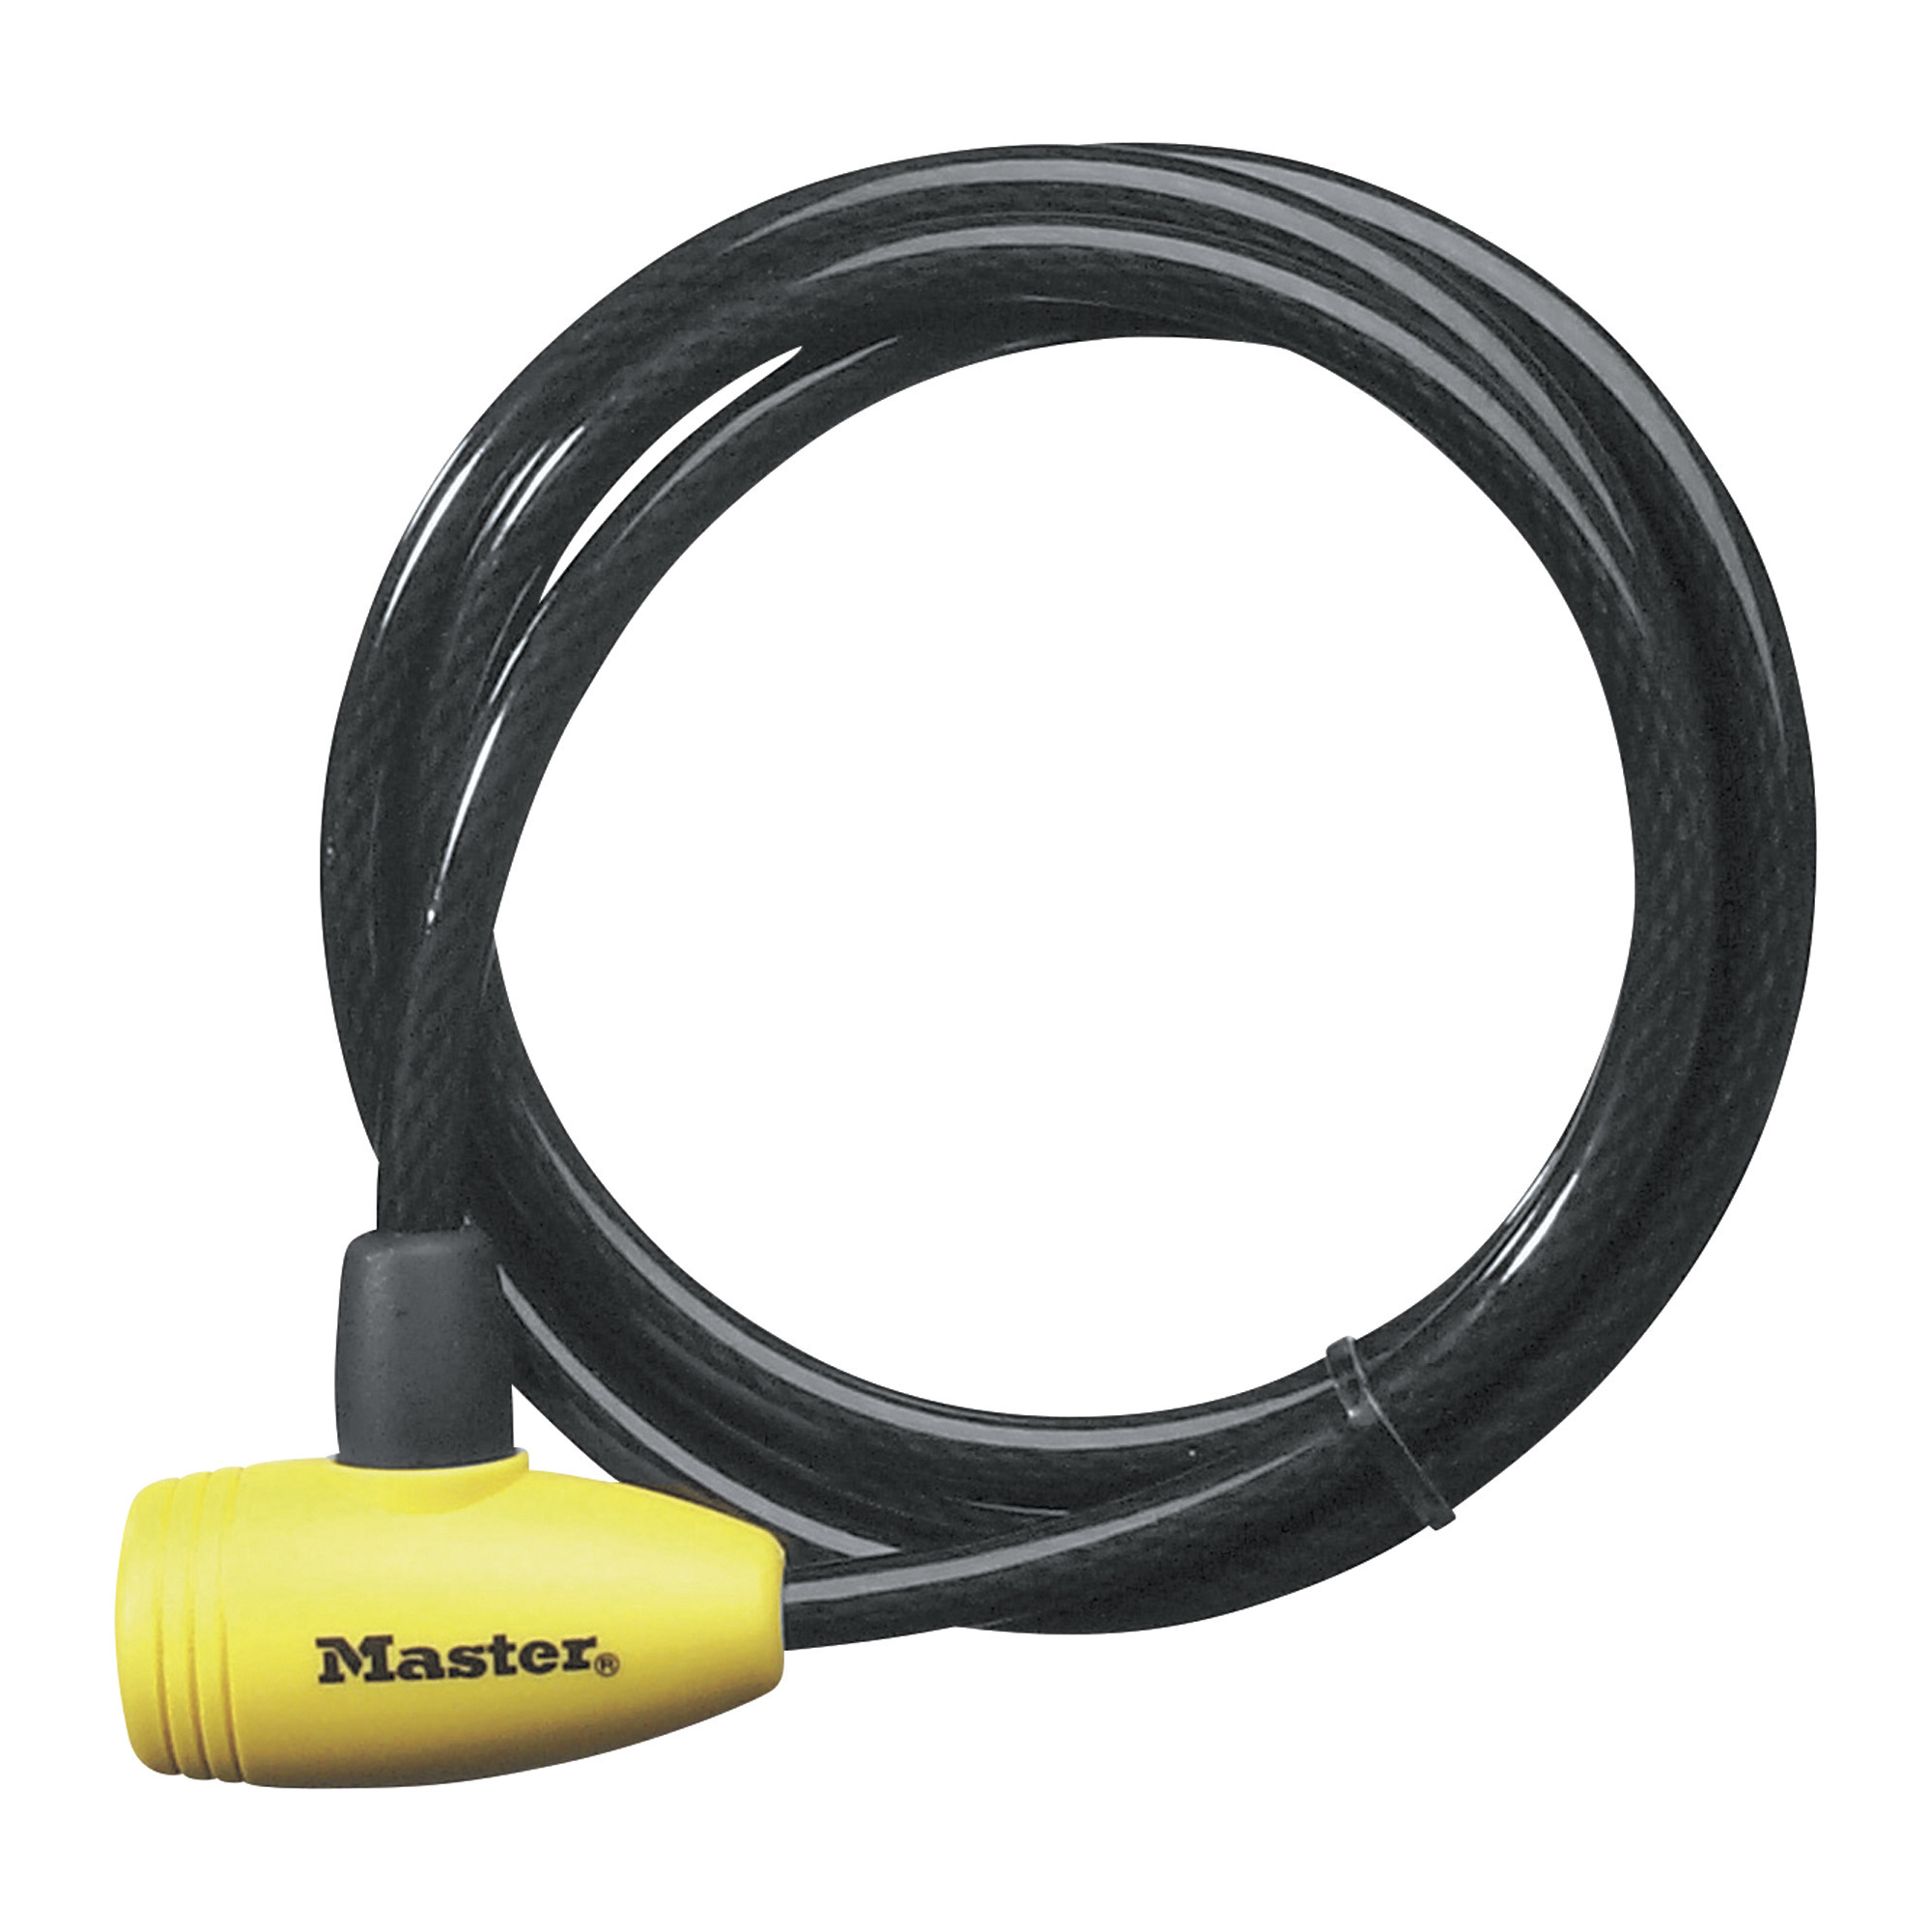 Master Lock 6-Ft. 3/8Inch Diameter Cable with Lock â Model 8154DPF